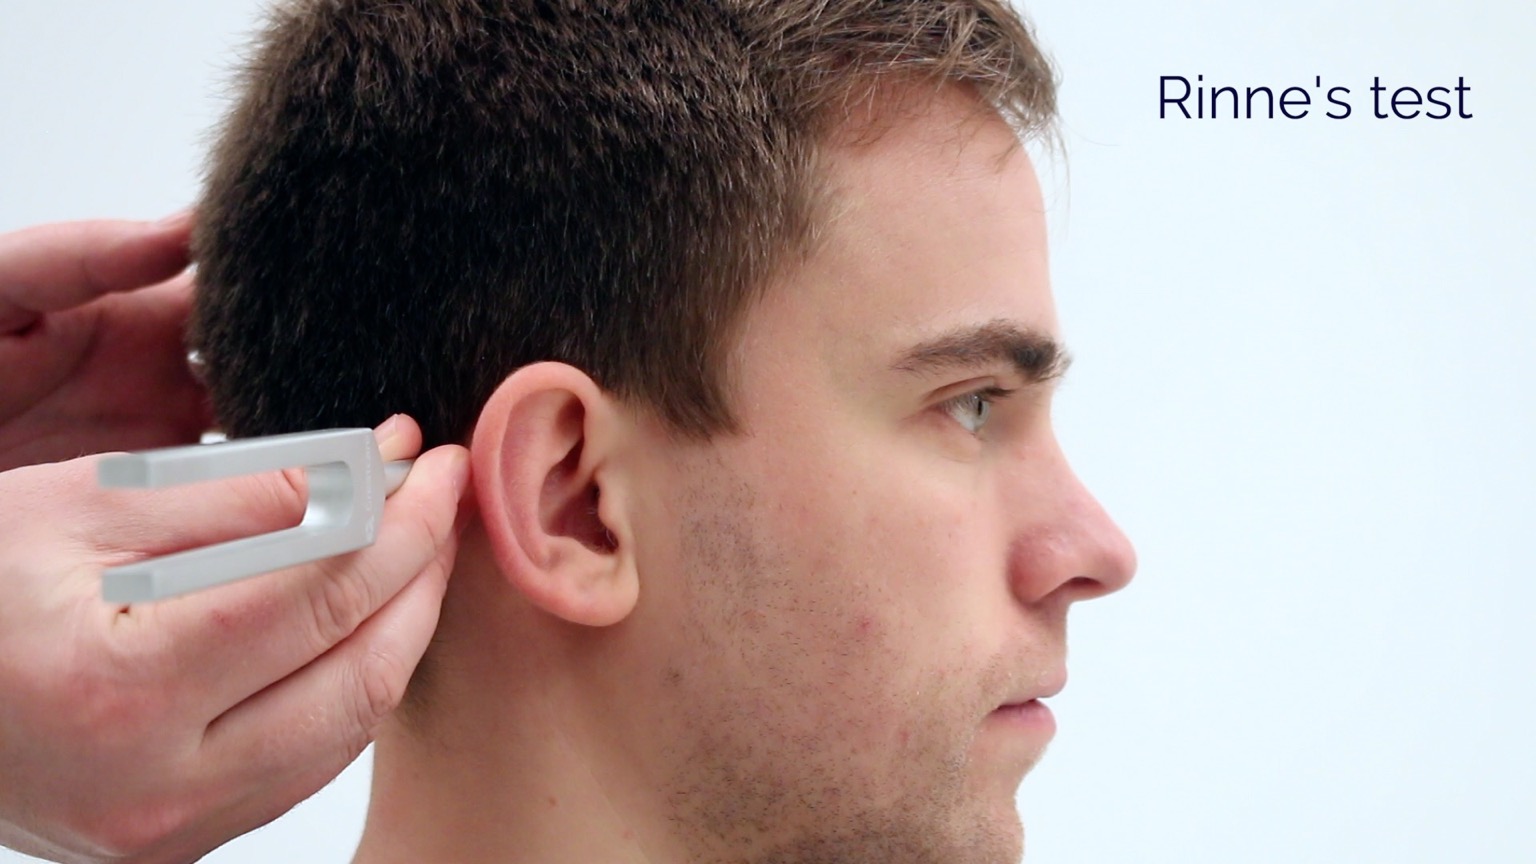 rinne test conductive hearing loss